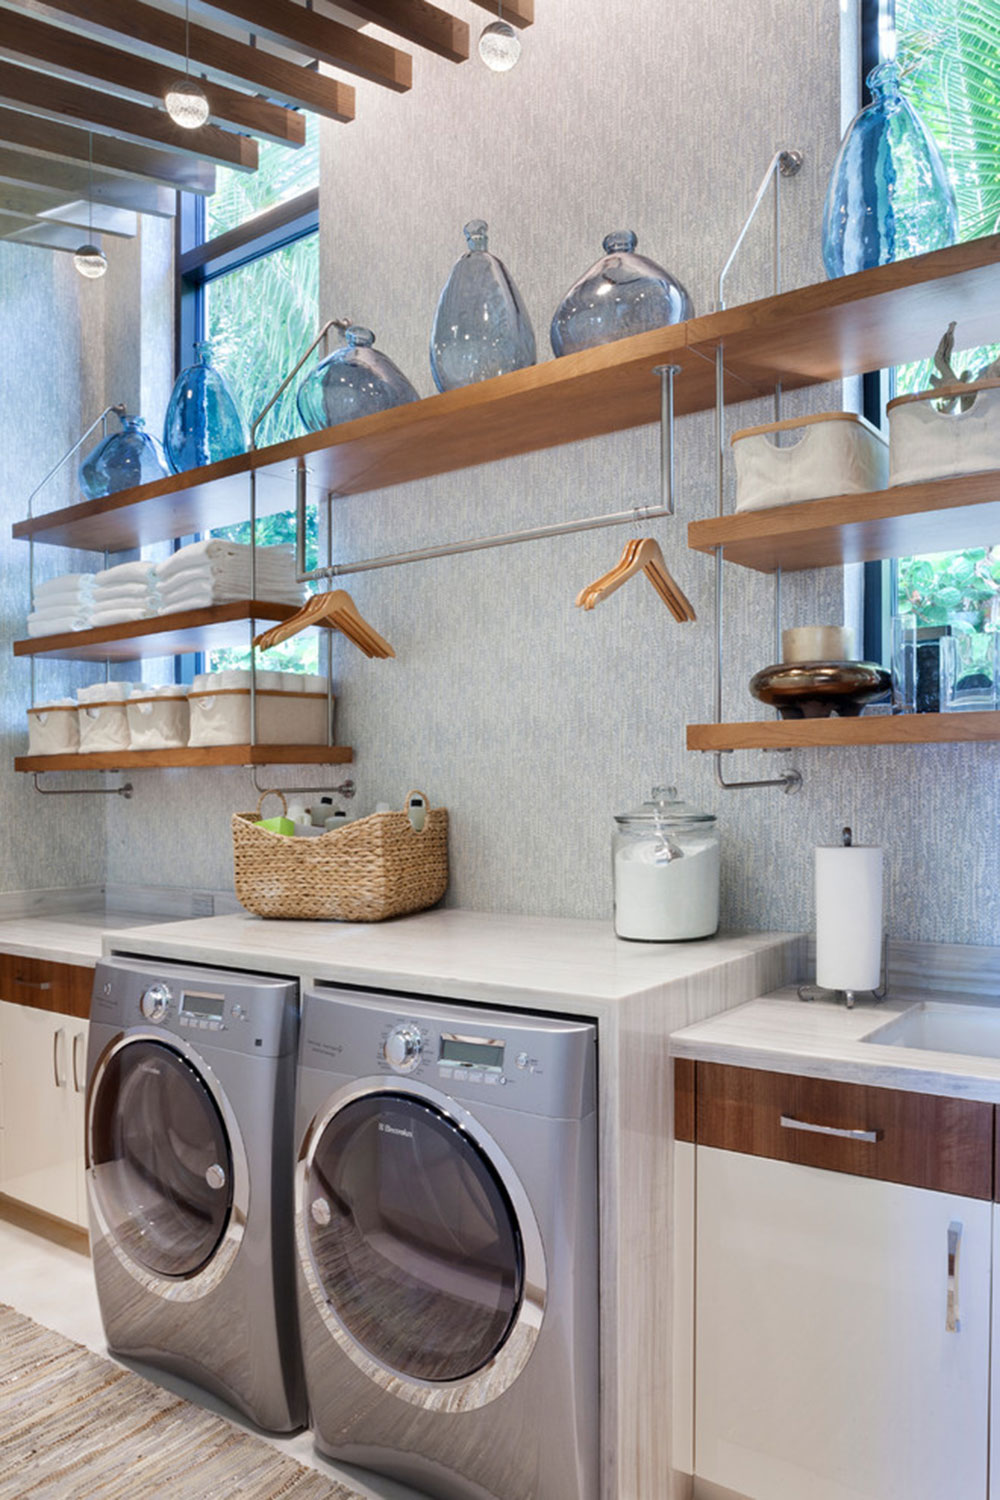 Ocean-Lane-Palm-Beach-by-Superior-Wood-Products How to organize a laundry room? Some storage ideas